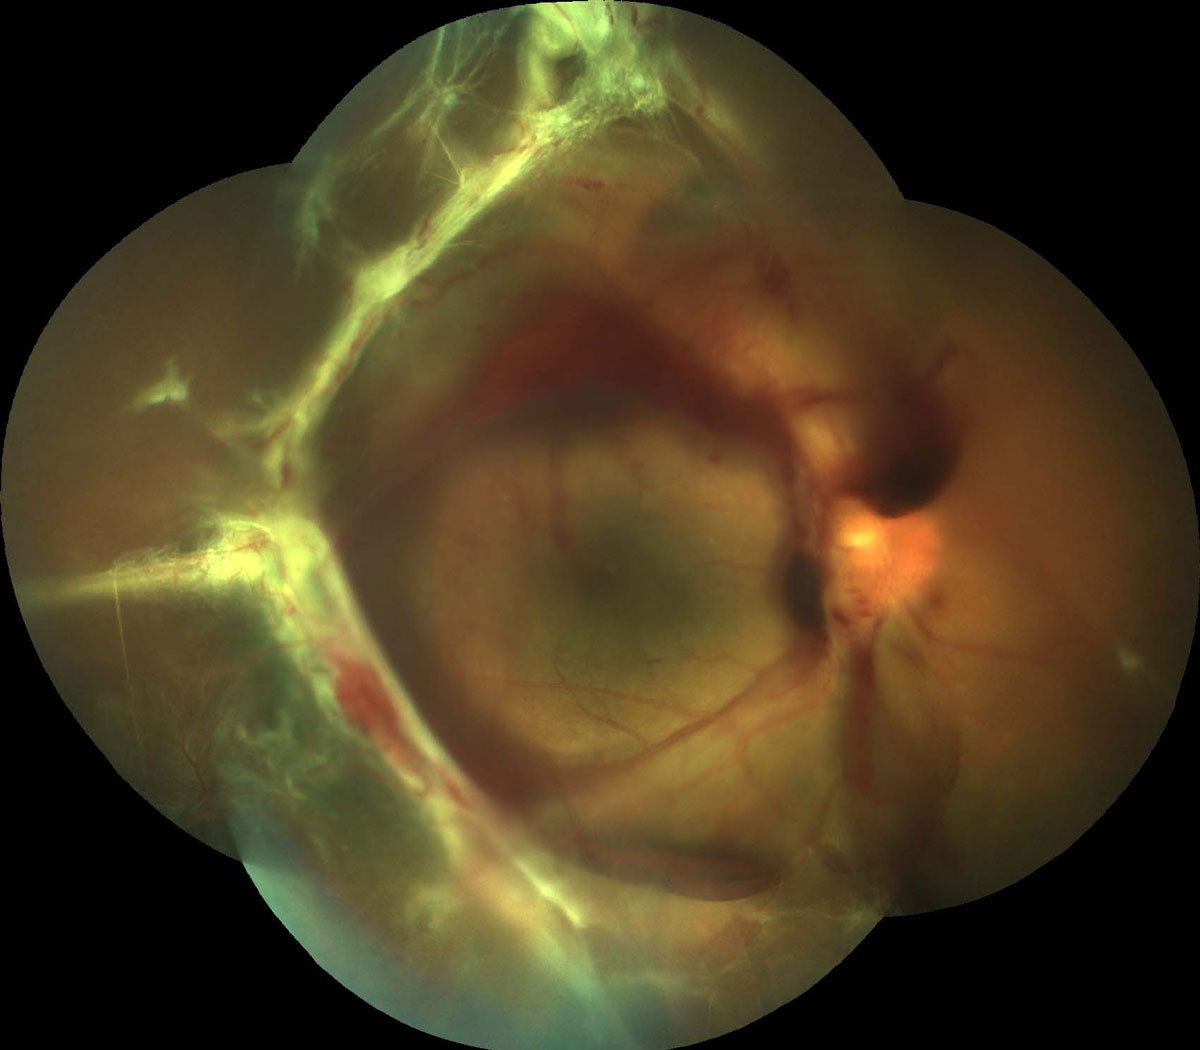 Figure 15.1.2 Tractional Retinal Detachment Threatening the Macular with Subhyaloid Hemorrhage